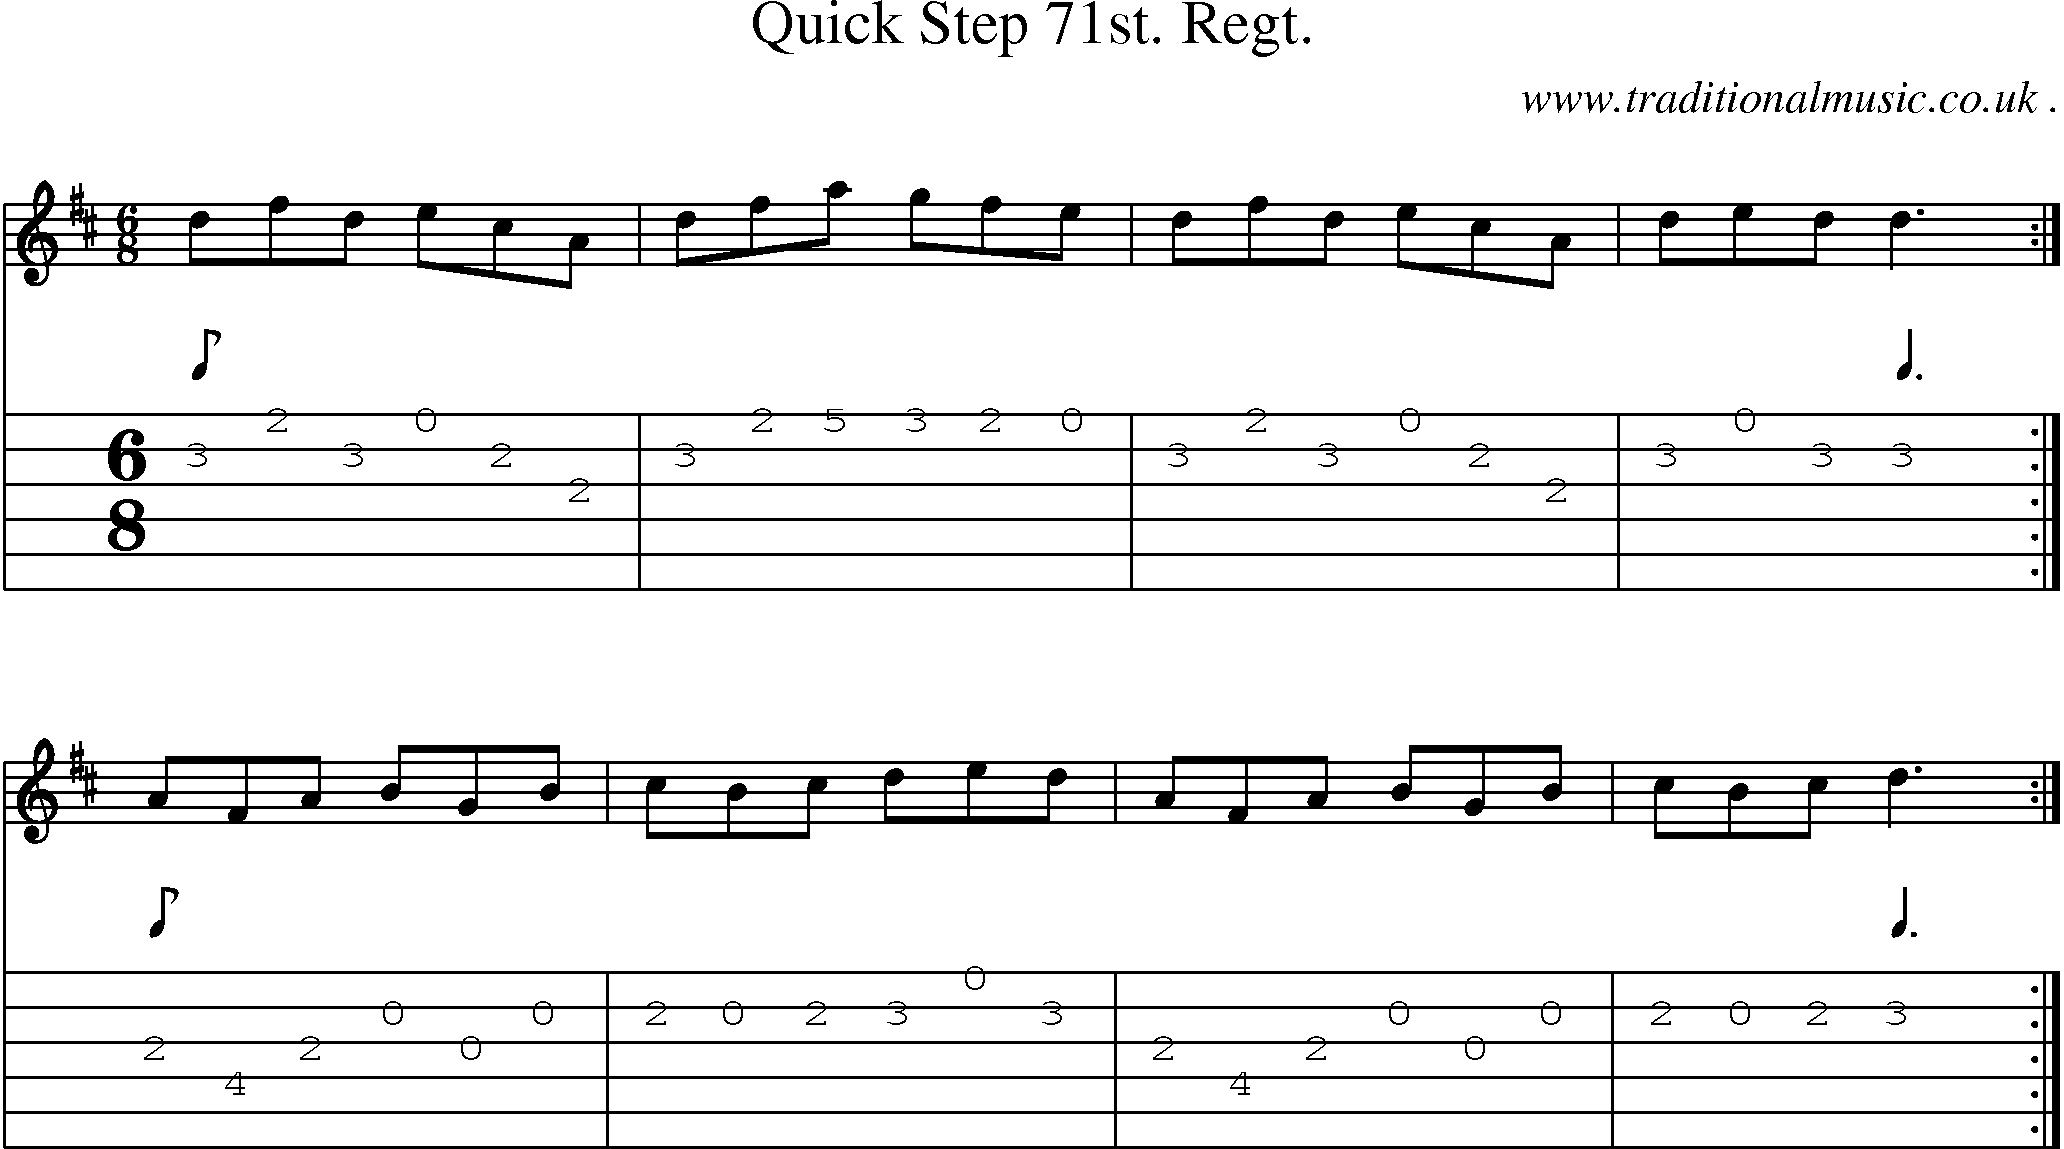 Sheet-Music and Guitar Tabs for Quick Step 71st Regt